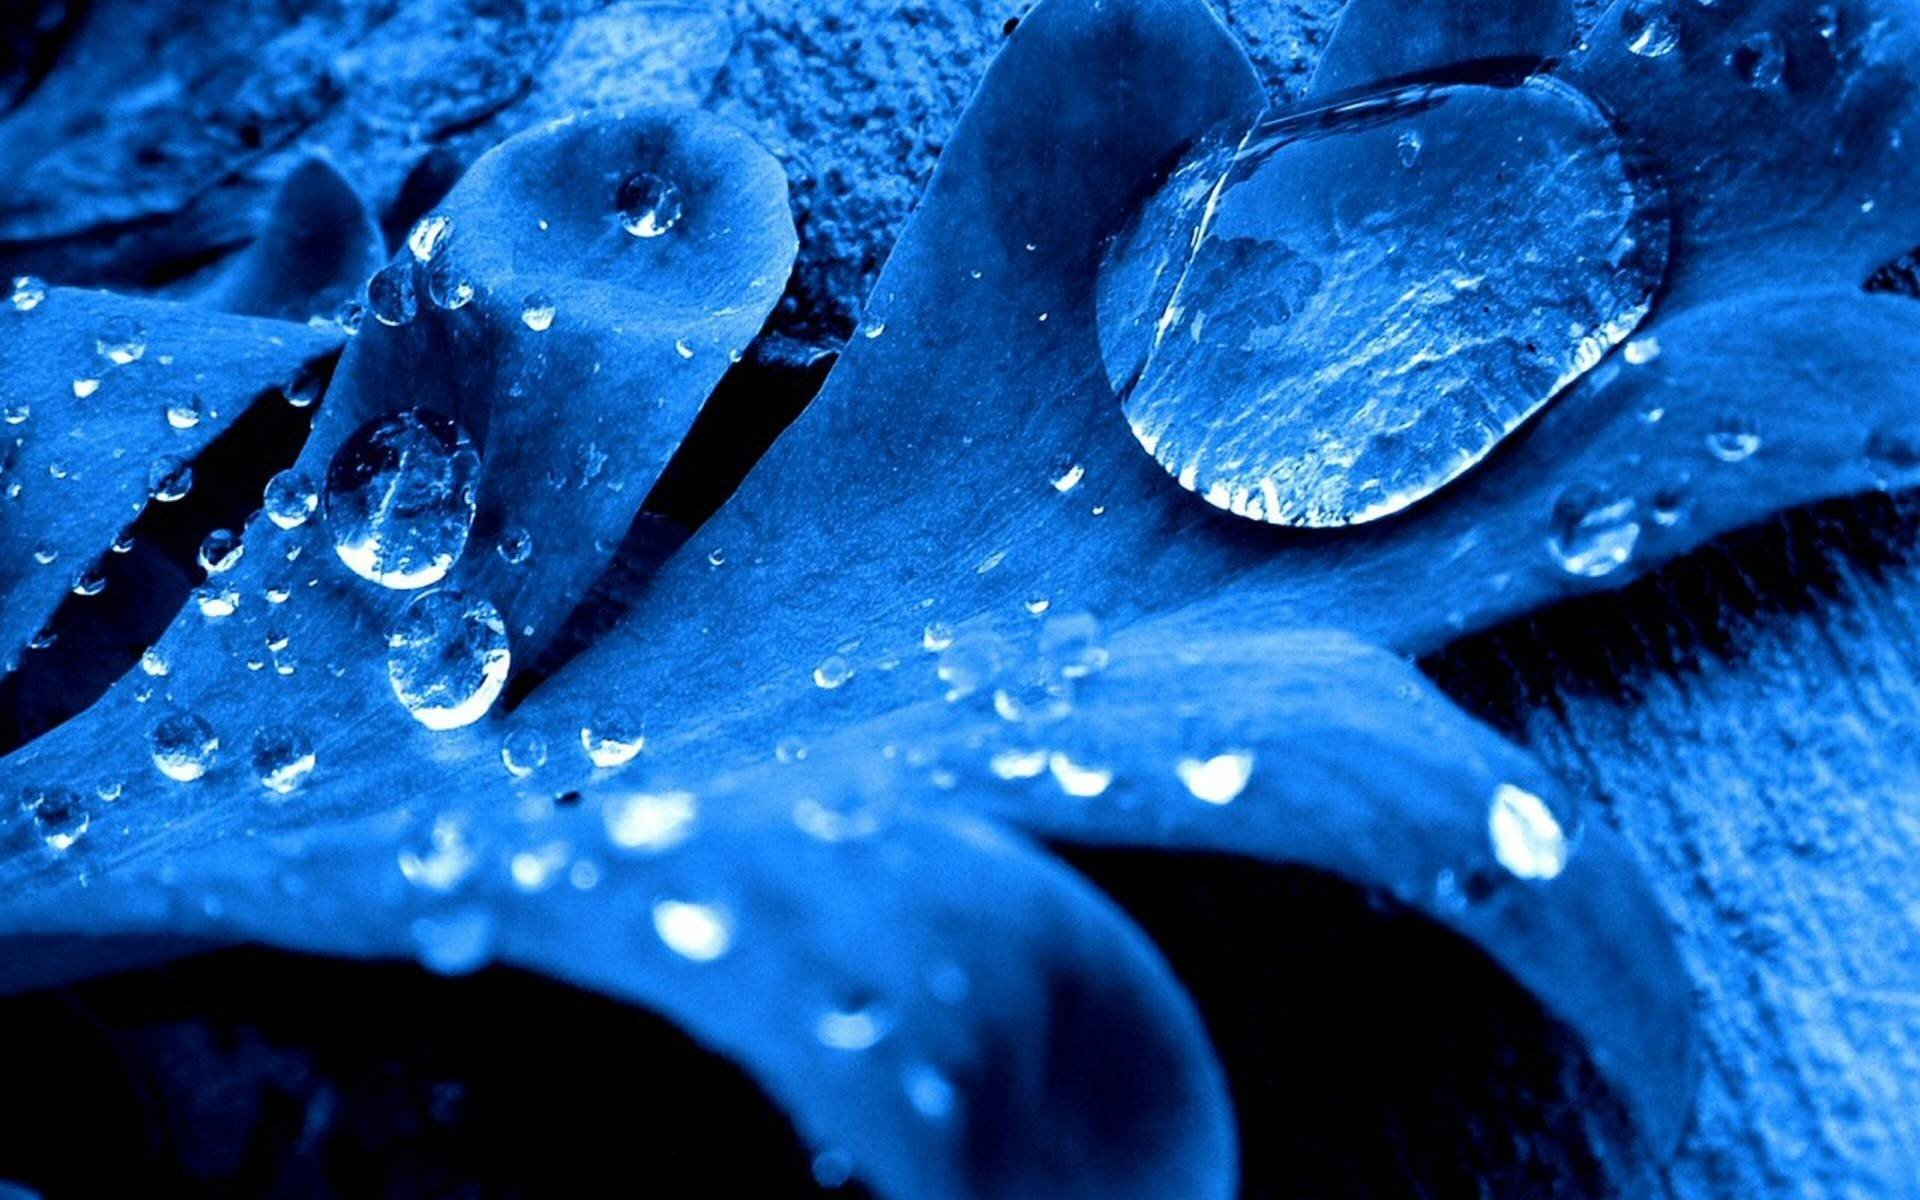 photography, Photo manipulation, Blue, Leaves, Water drops Wallpaper